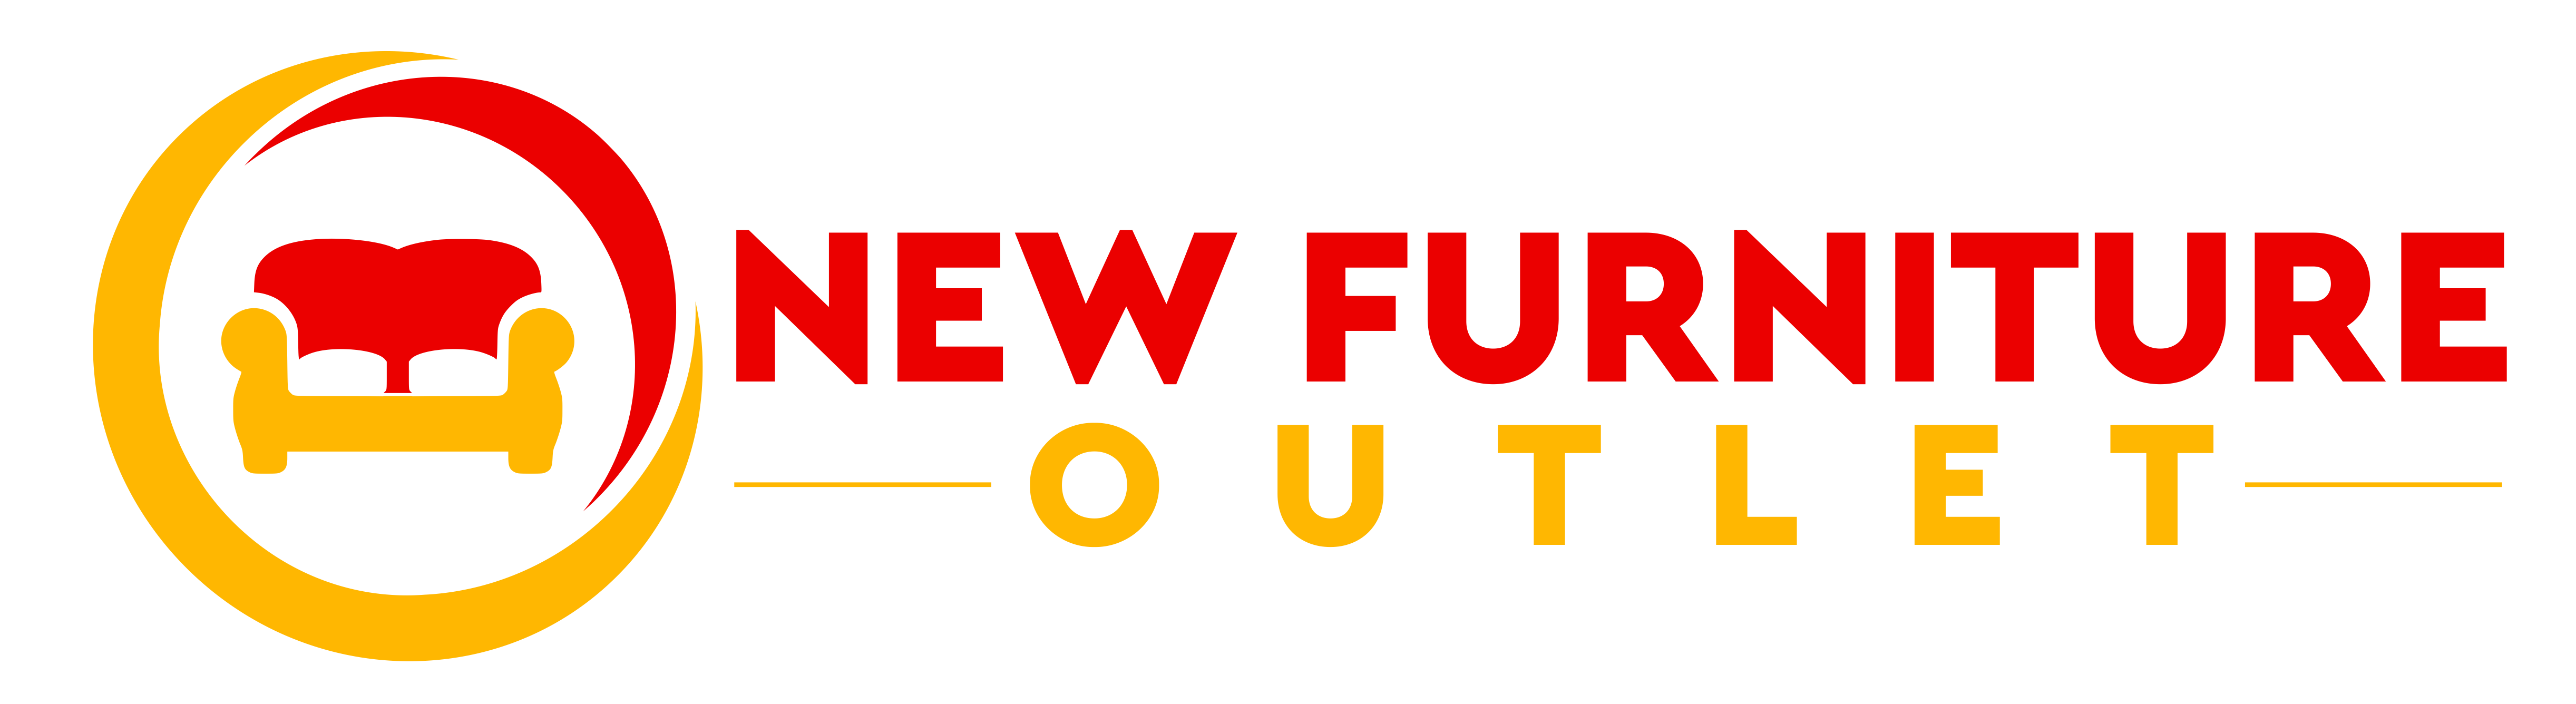 New Furniture Outlet